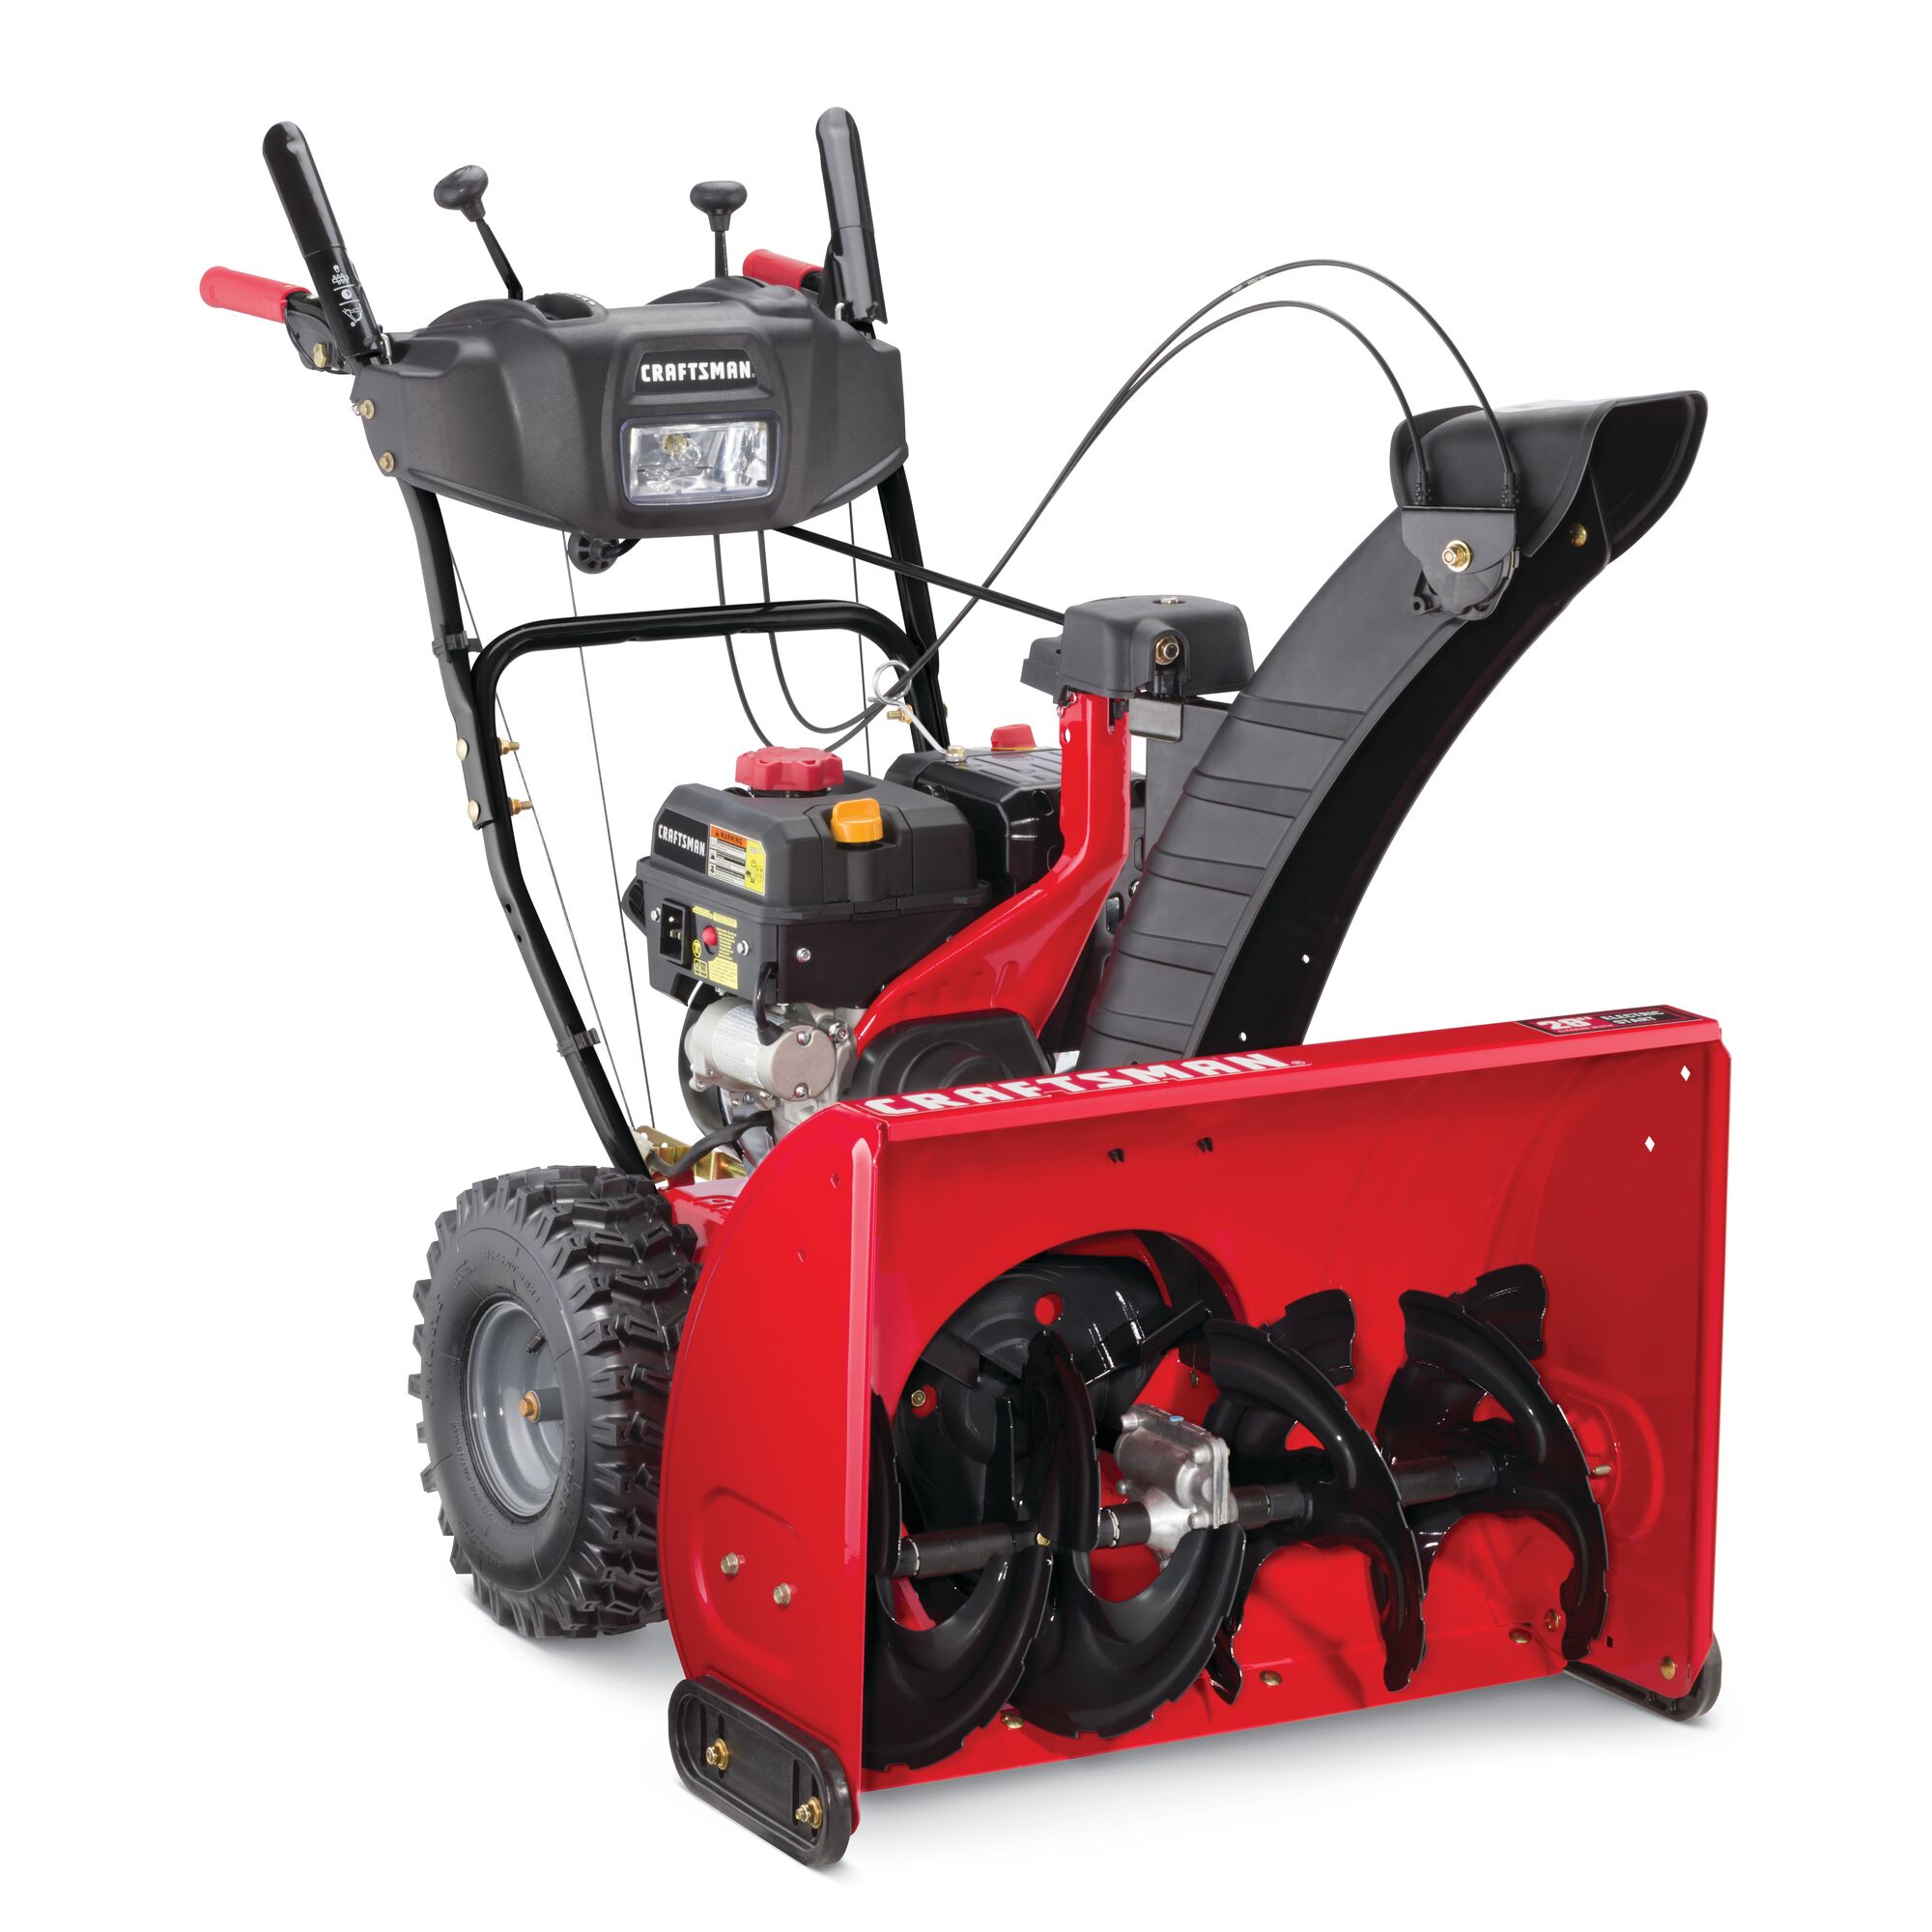 Profile of 28 inch 243 CC electric start two stage snow blower.